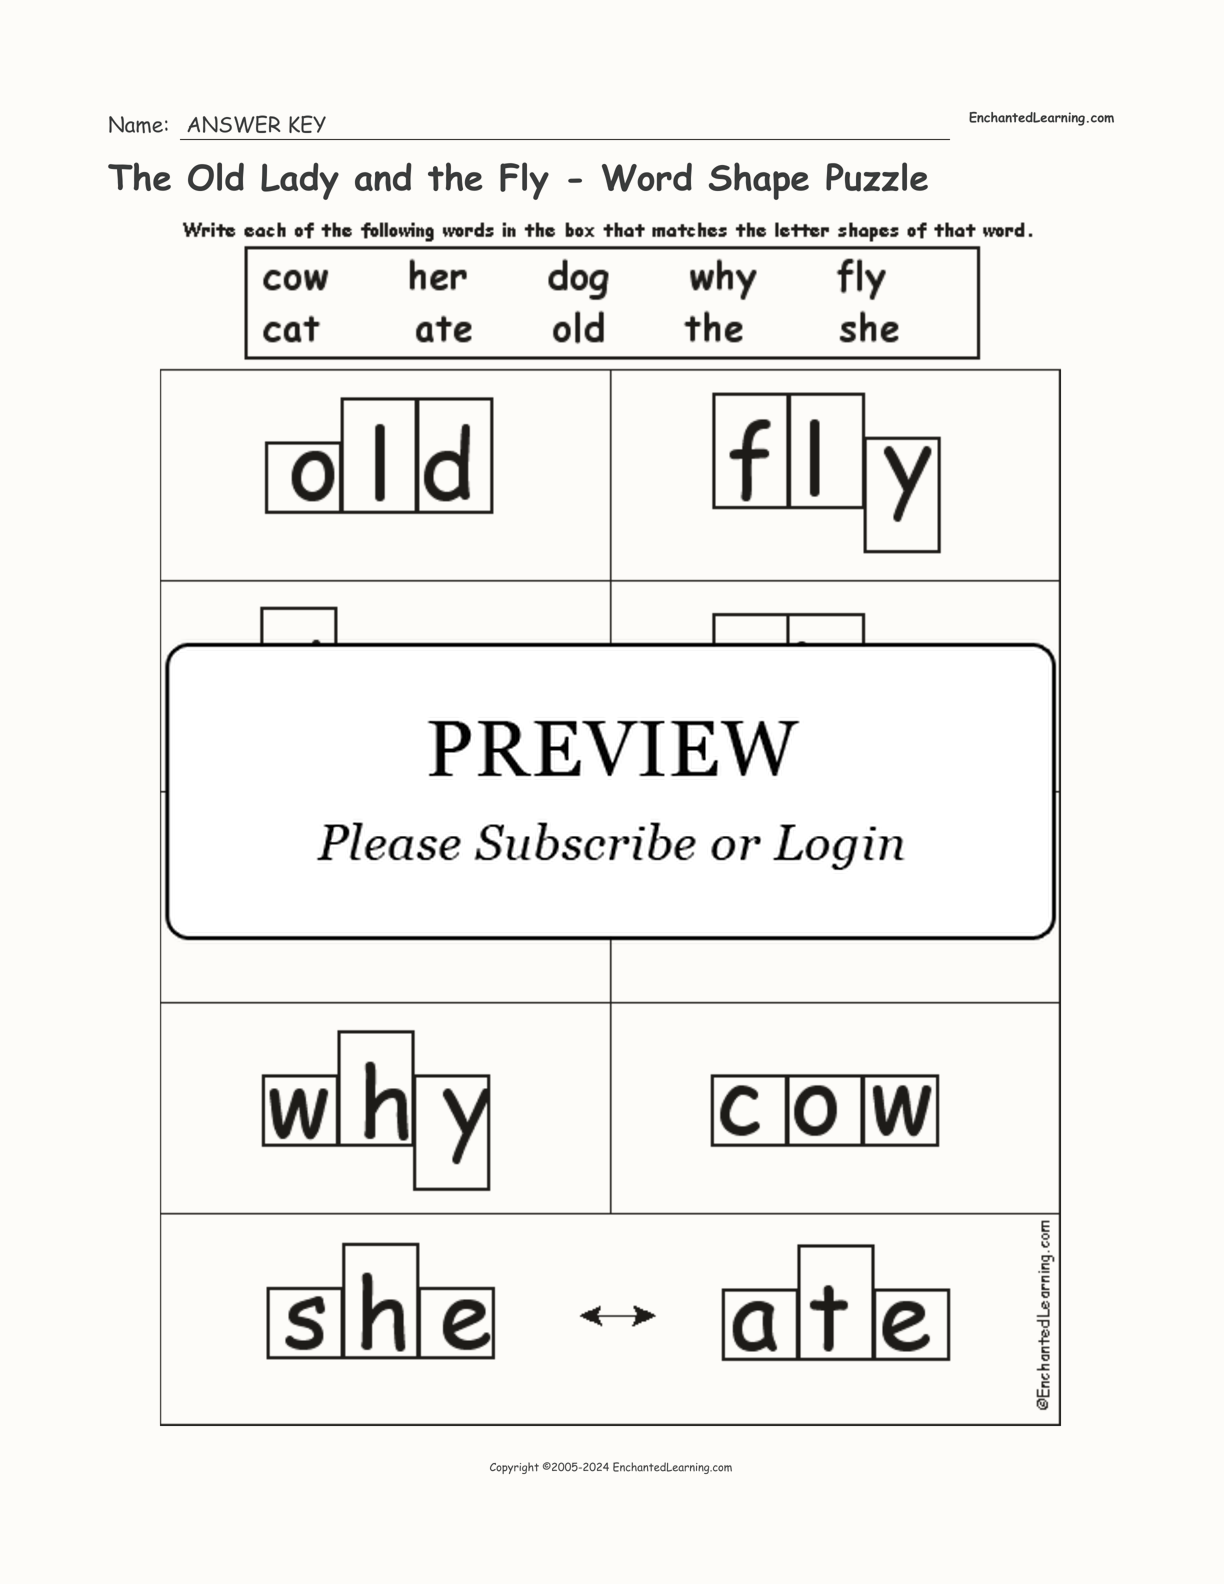 The Old Lady and the Fly - Word Shape Puzzle interactive worksheet page 2